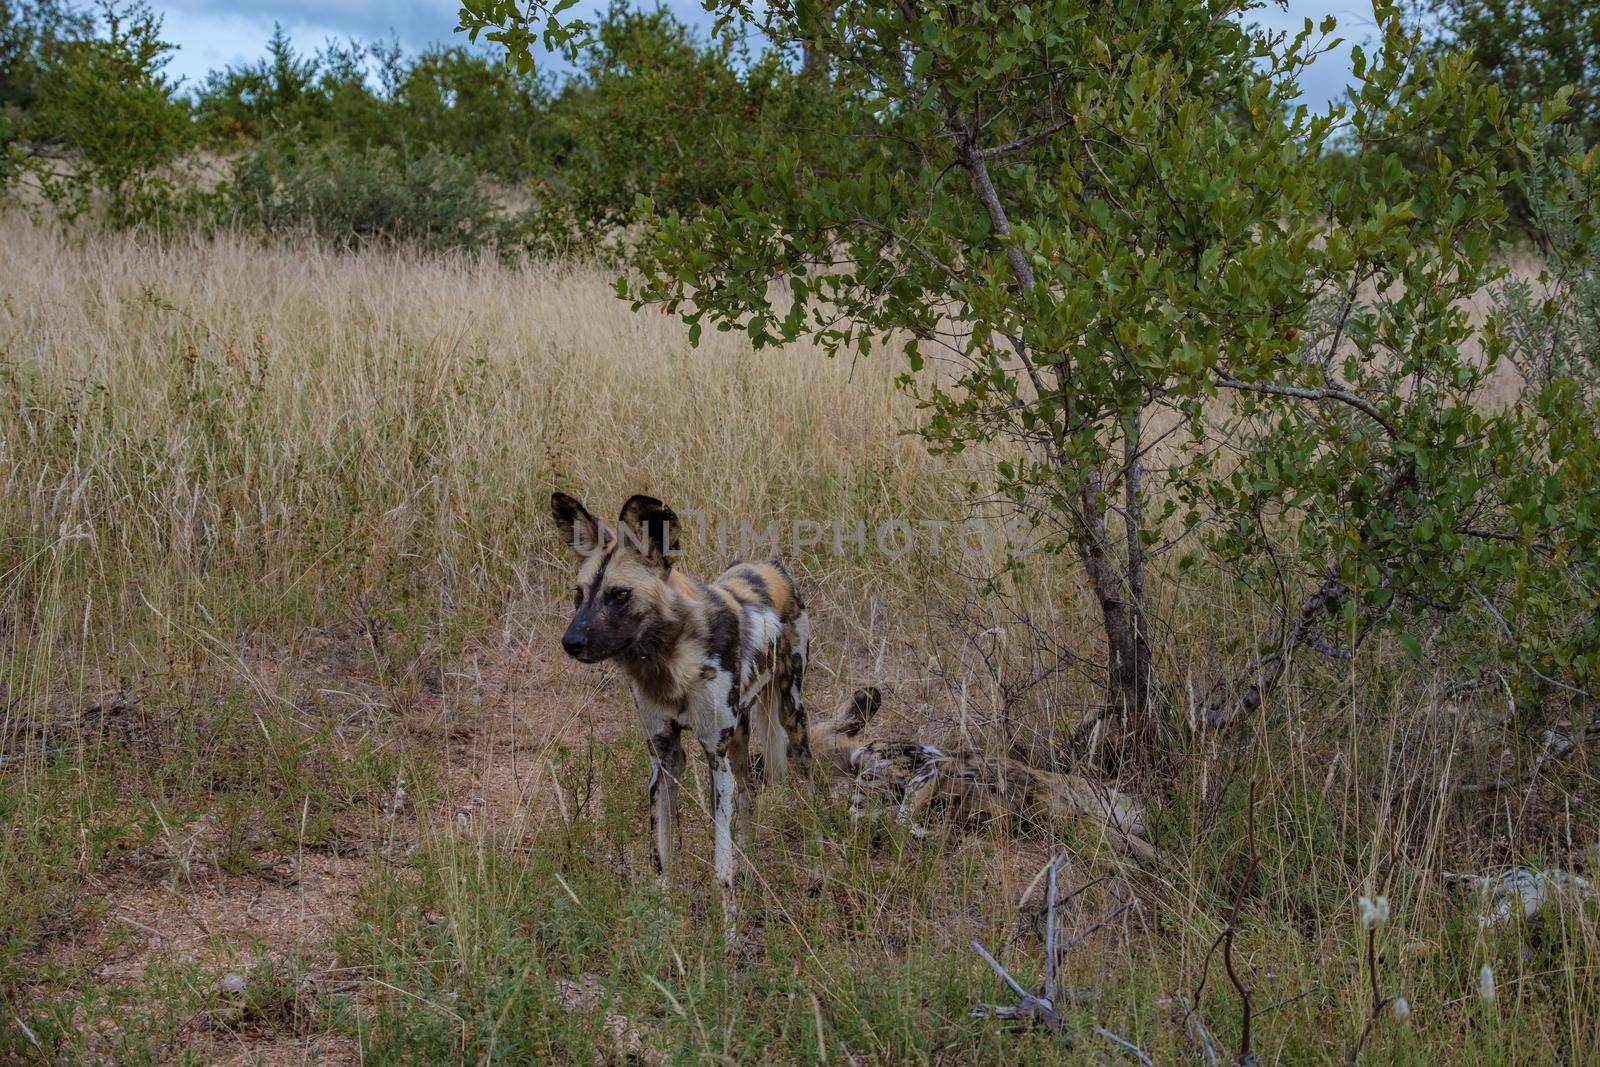 Wild dog at the Klaserie Private Nature Reserve part of the Kruger national park in South Africa. wild dog safari animals